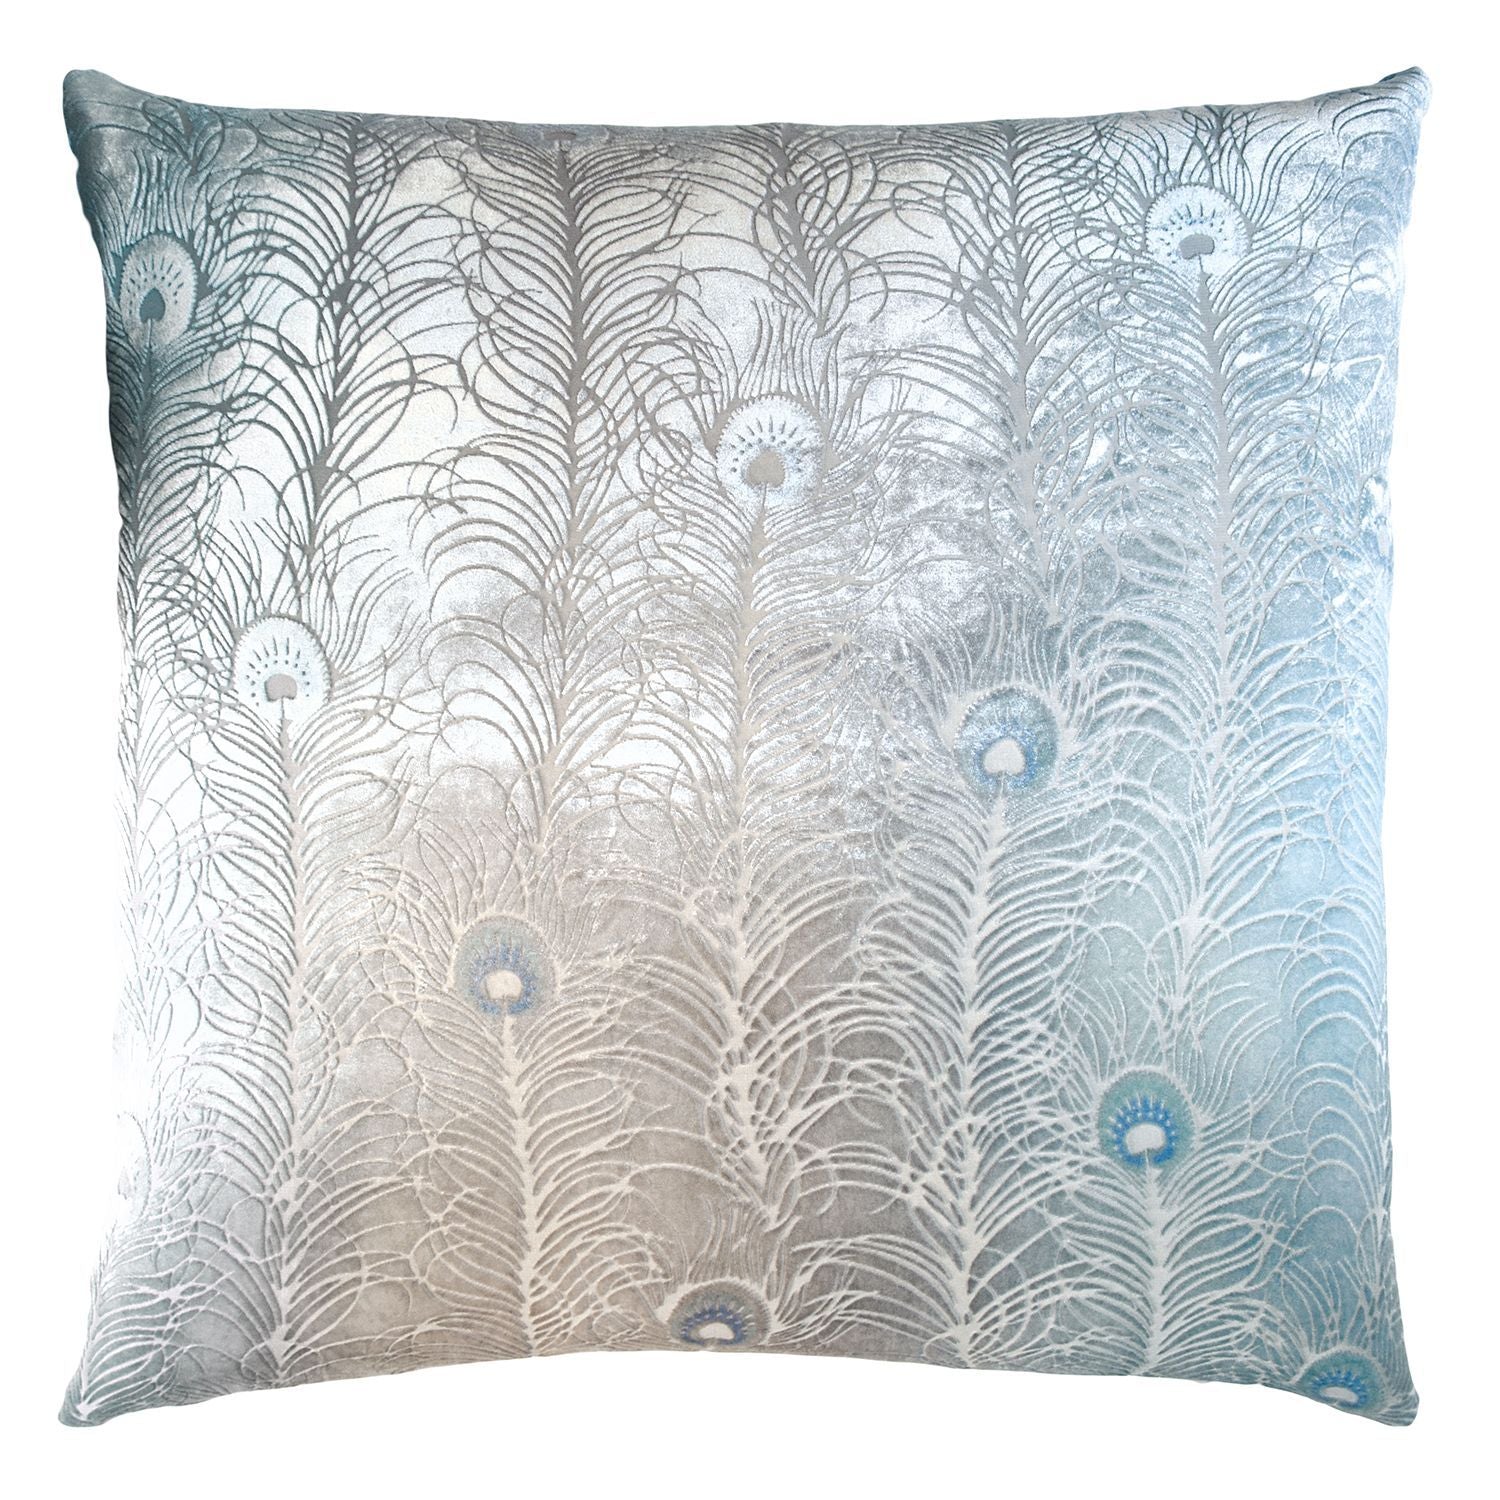 Fig Linens - Robin's Egg Peacock Feather Decorative Pillow by Kevin O'Brien Studio